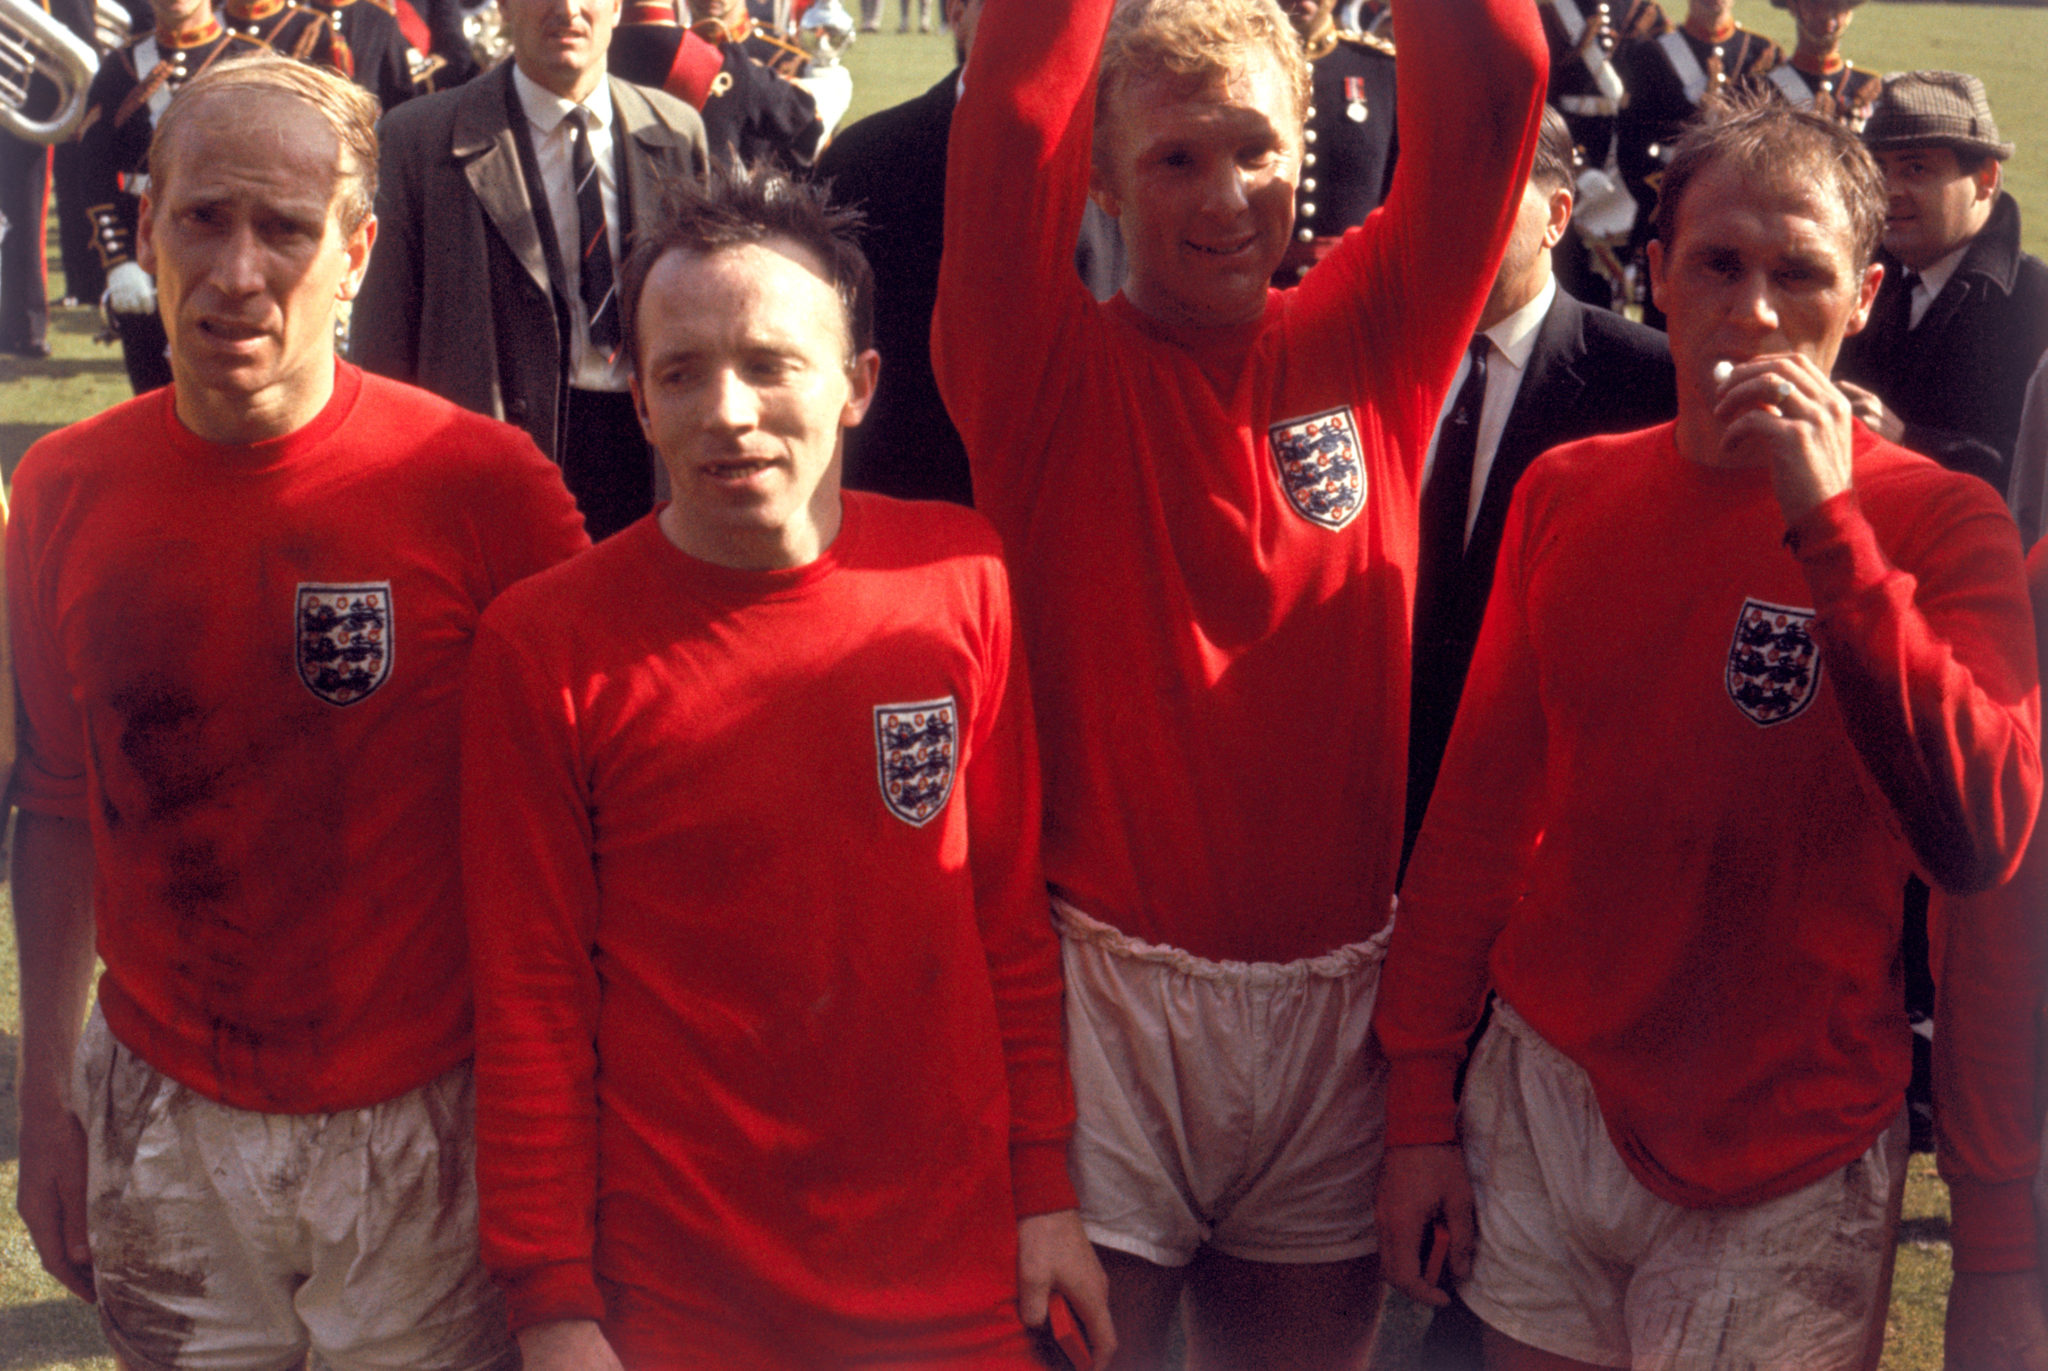 (L-R) Exhausted England players Bobby Charlton, Nobby Stiles, Bobby Moore and Ray Wilson after the game